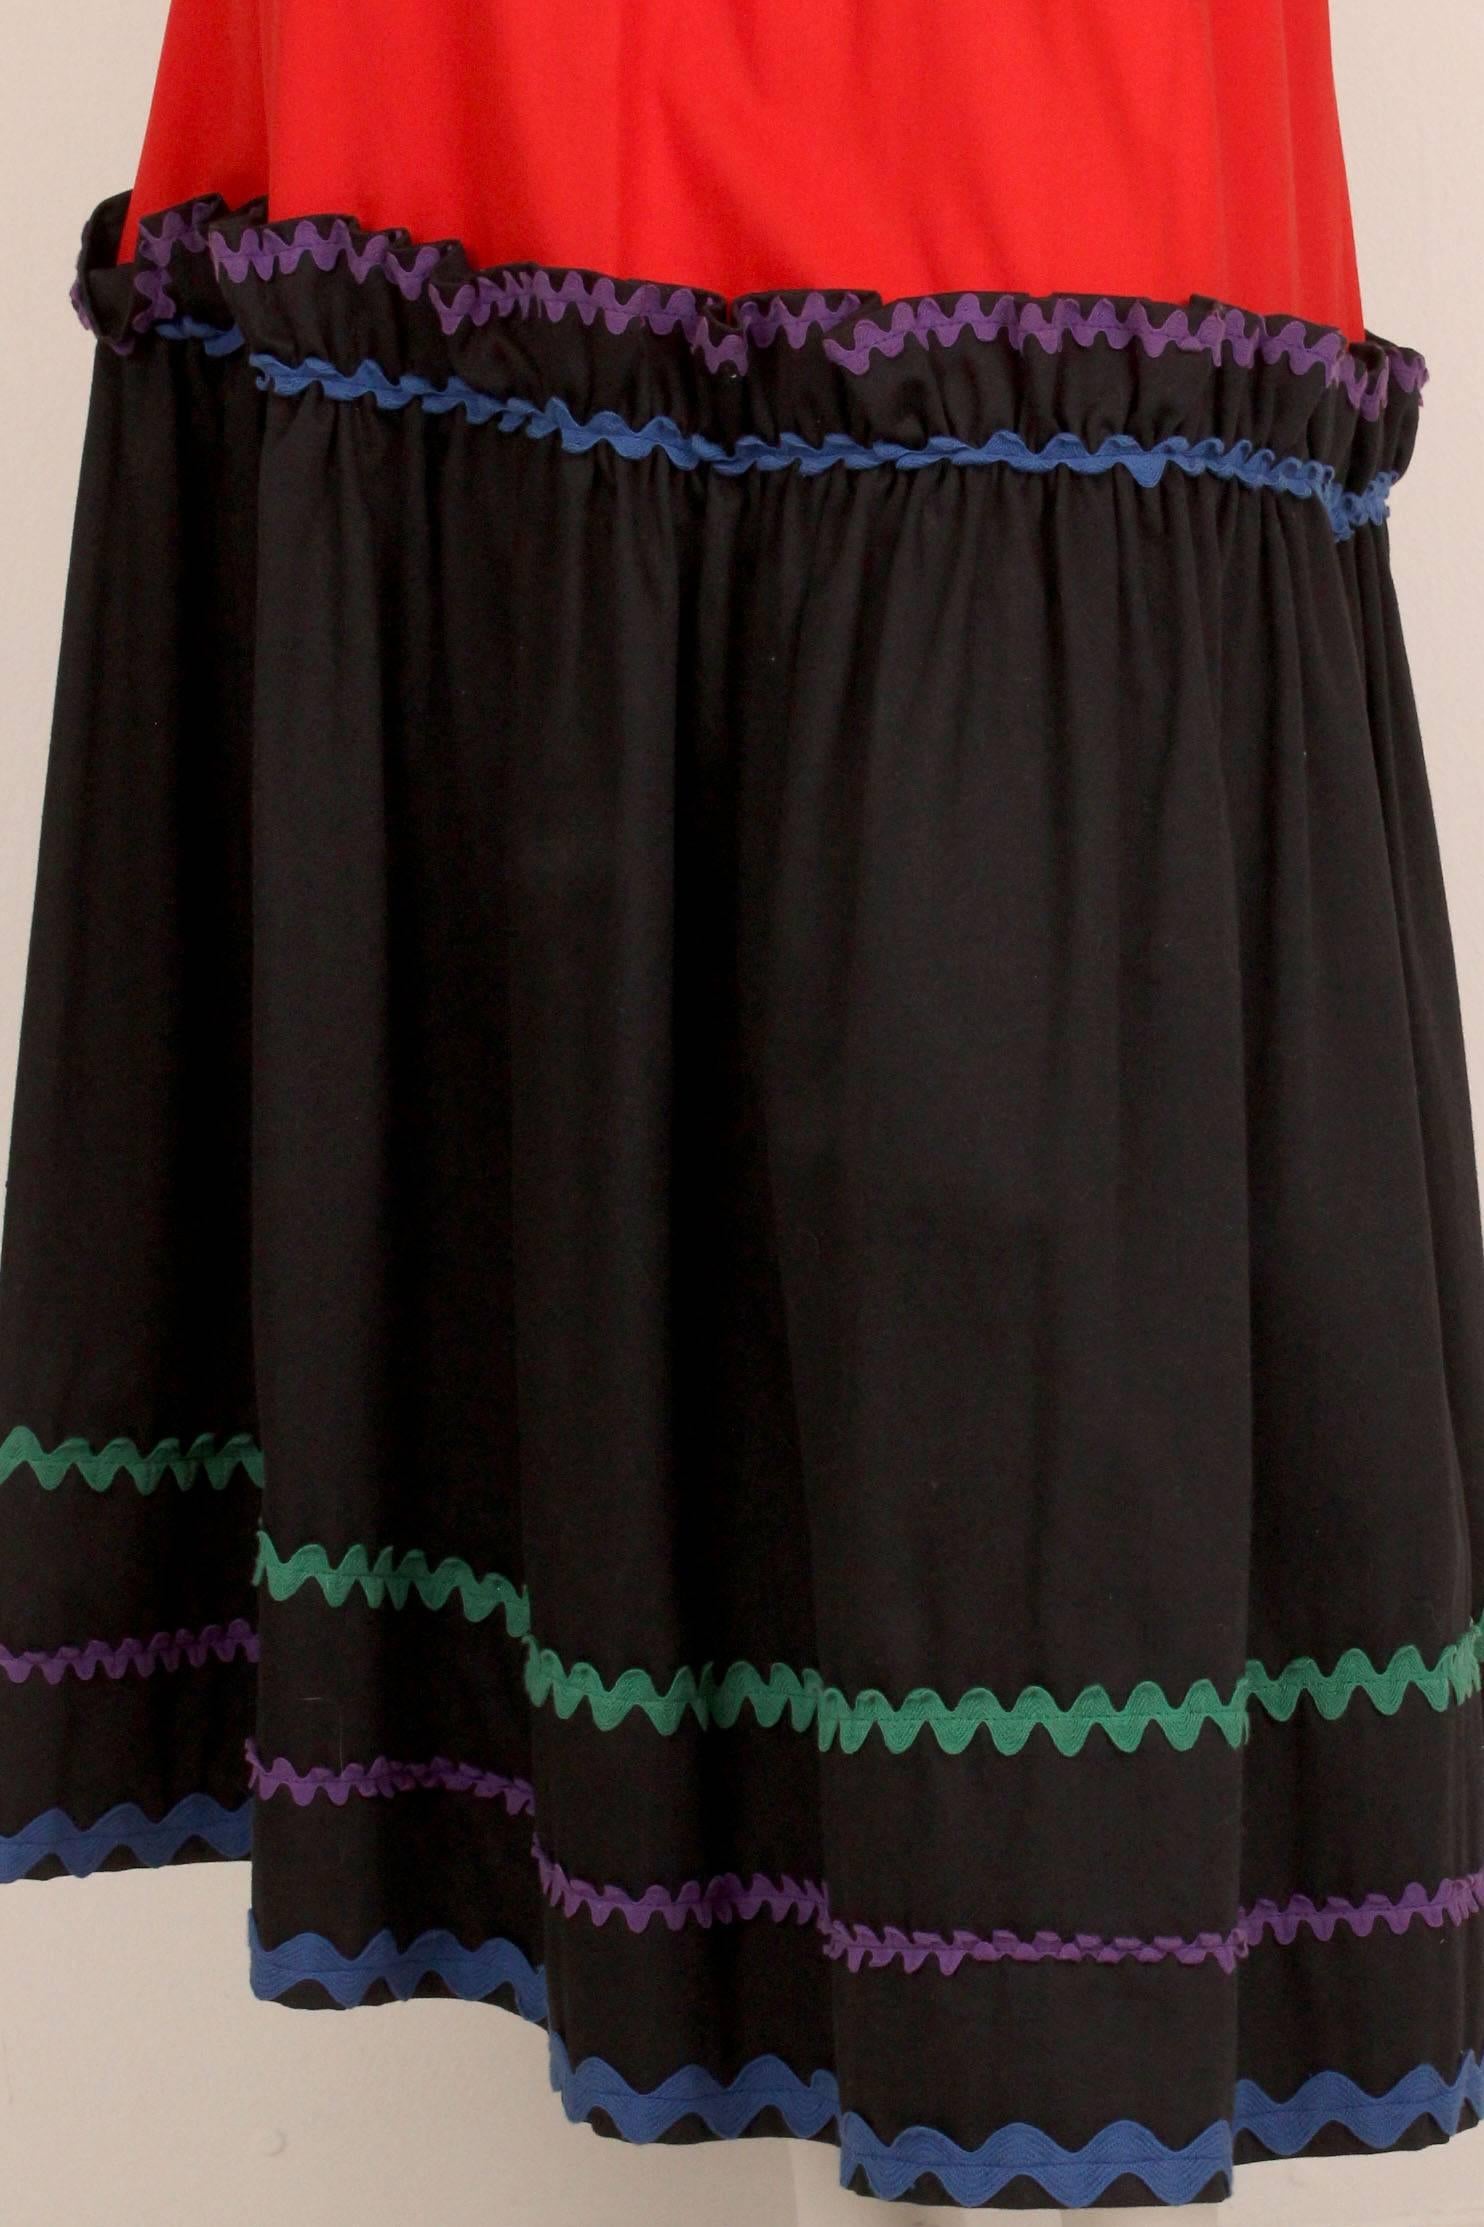 Special Sale $498 Originally $795
This skirt is from the Yves Saint Laurent Rive Gauche collections of the mid to late 1970s when he drew on ethnic themes for his inspiration.  This skirt is in a peasant style with  two tiers of fabric and bold ric